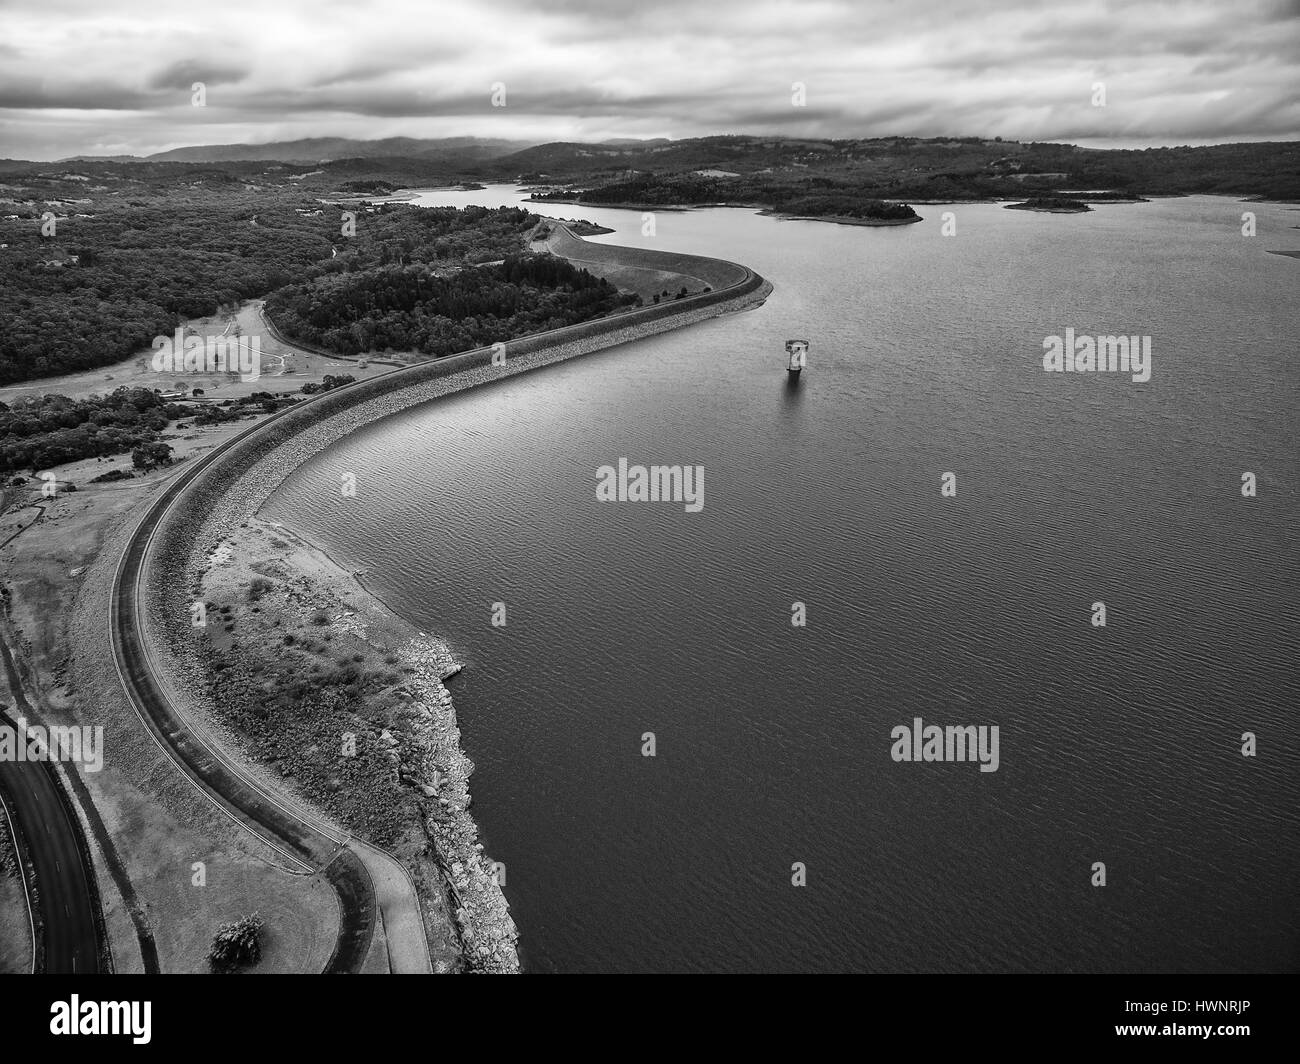 Black and white aerial view of Cardinia Reservoir lake and rural surroundings. Melbourne, Victoria, Australia Stock Photo